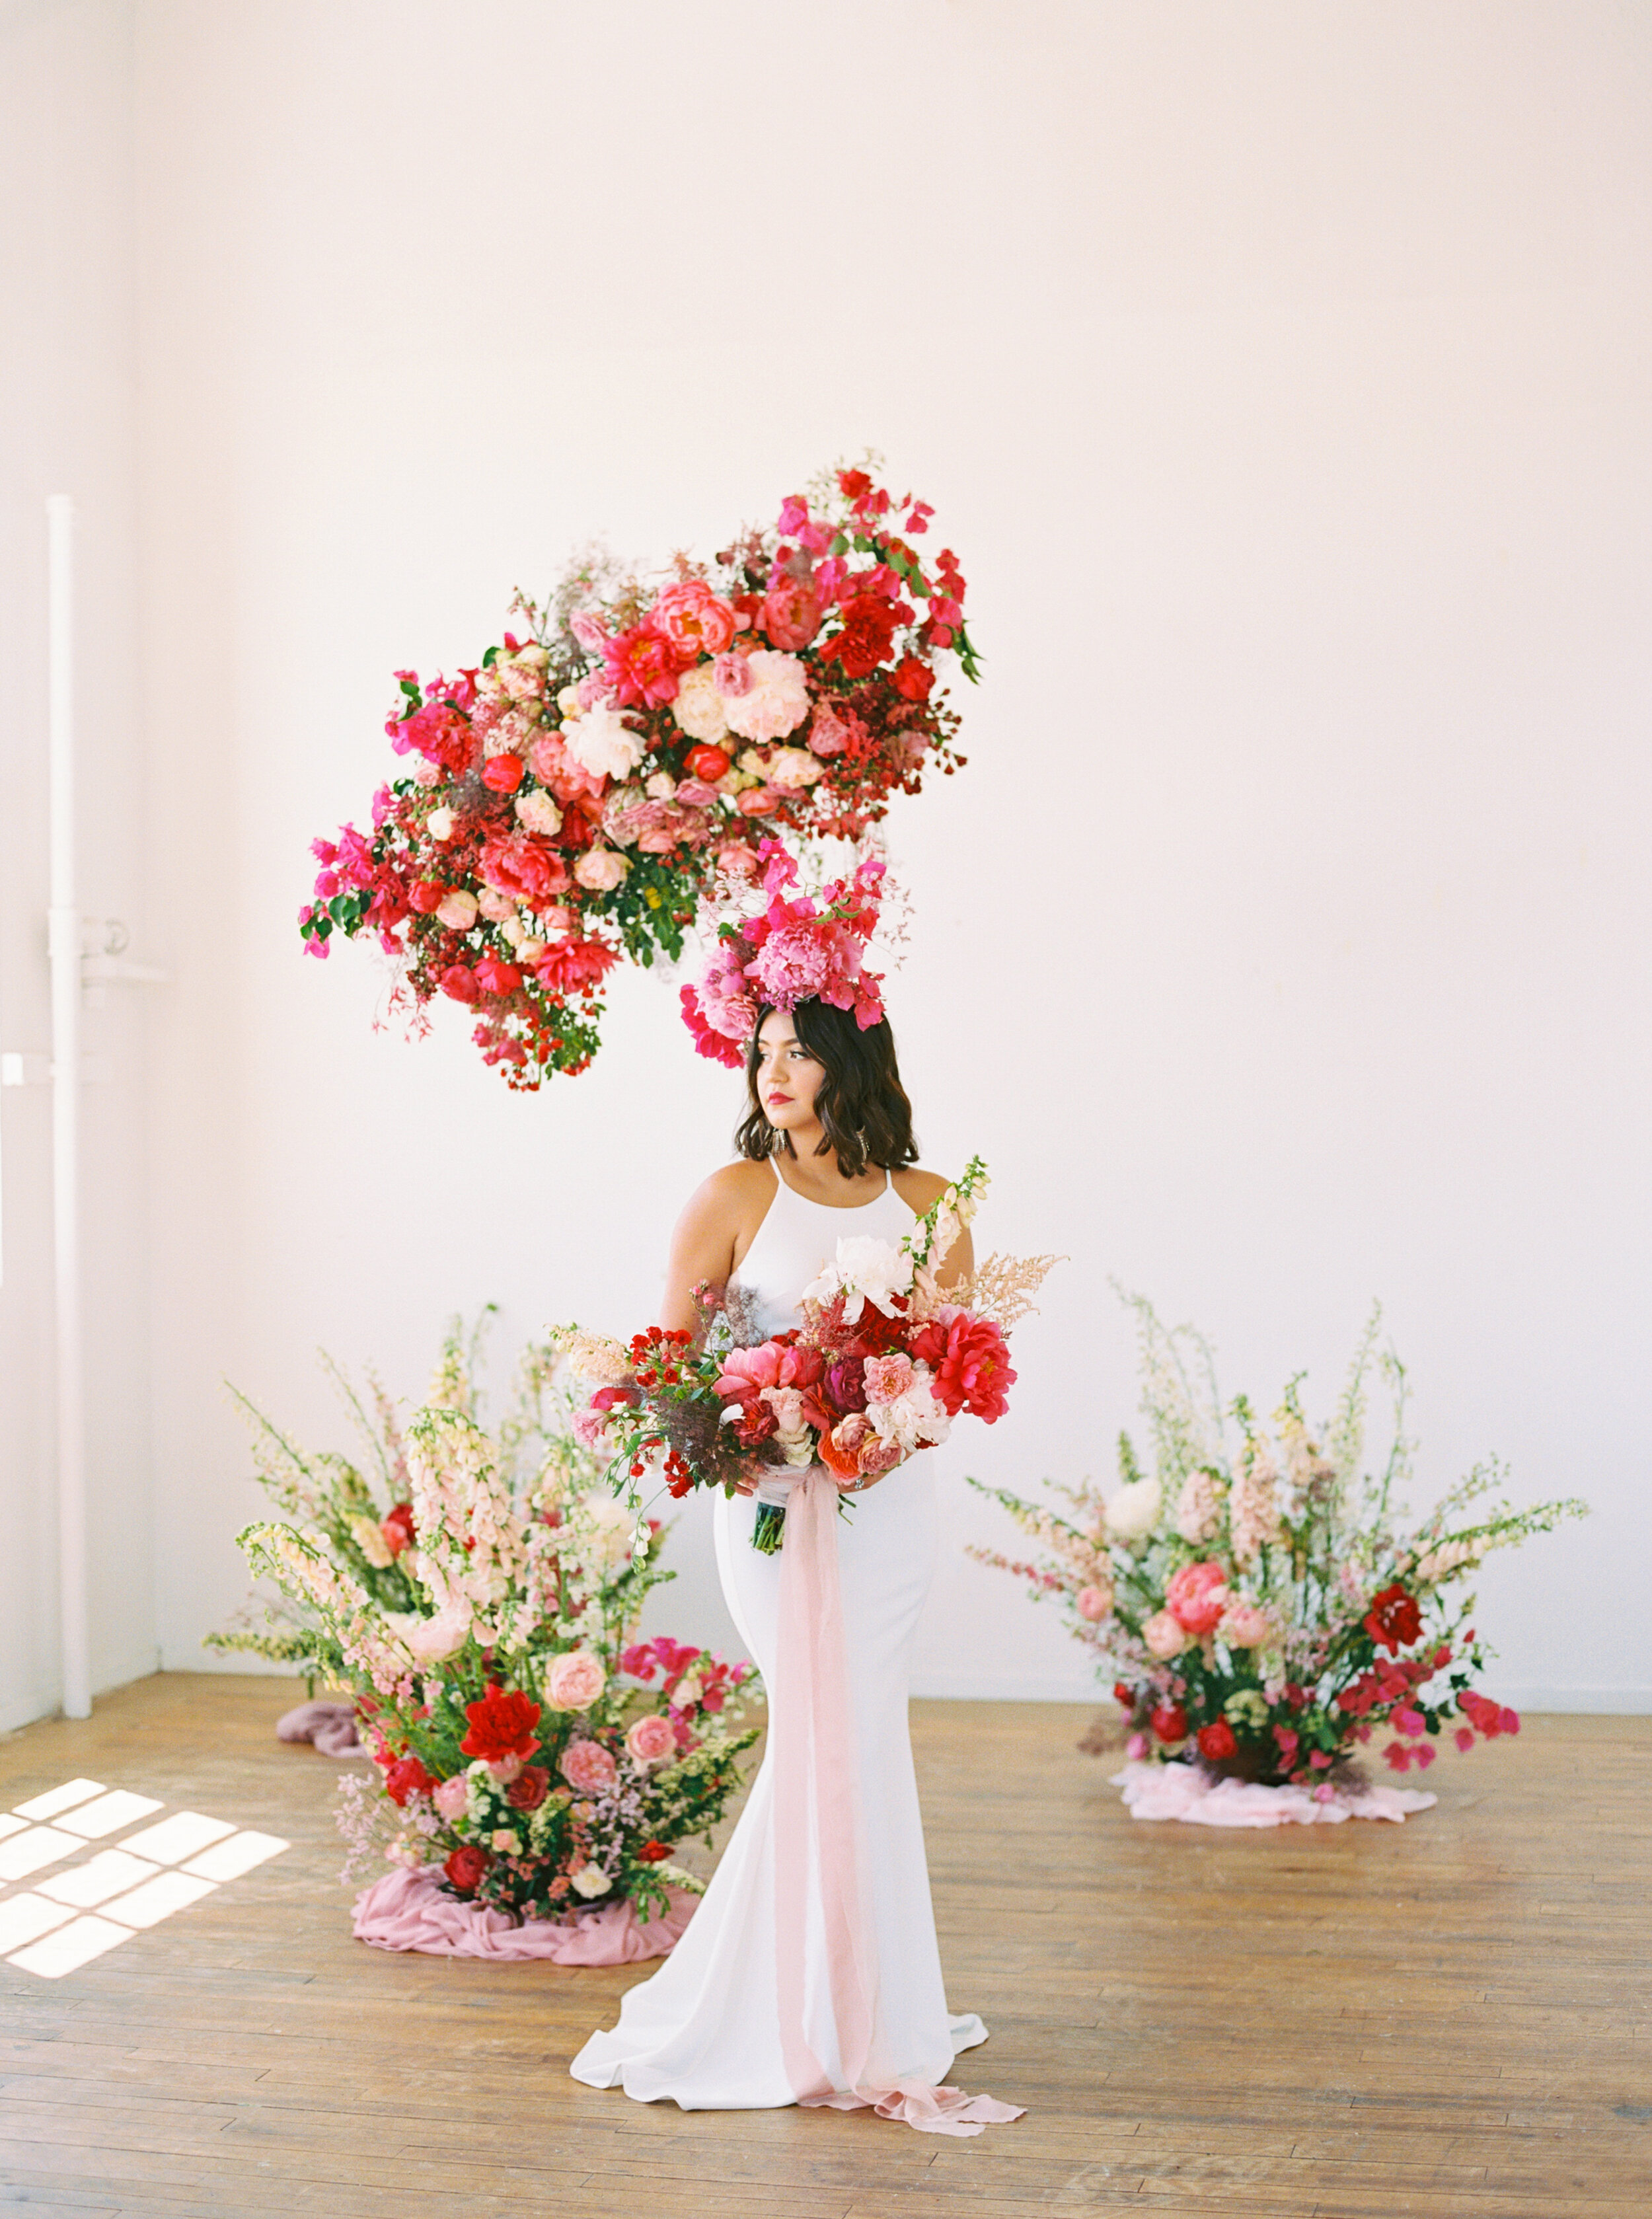 A Romantic Wedding Elopement Filled with Colorful Fuchsia - Sarahi Hadden Submission-73.jpg